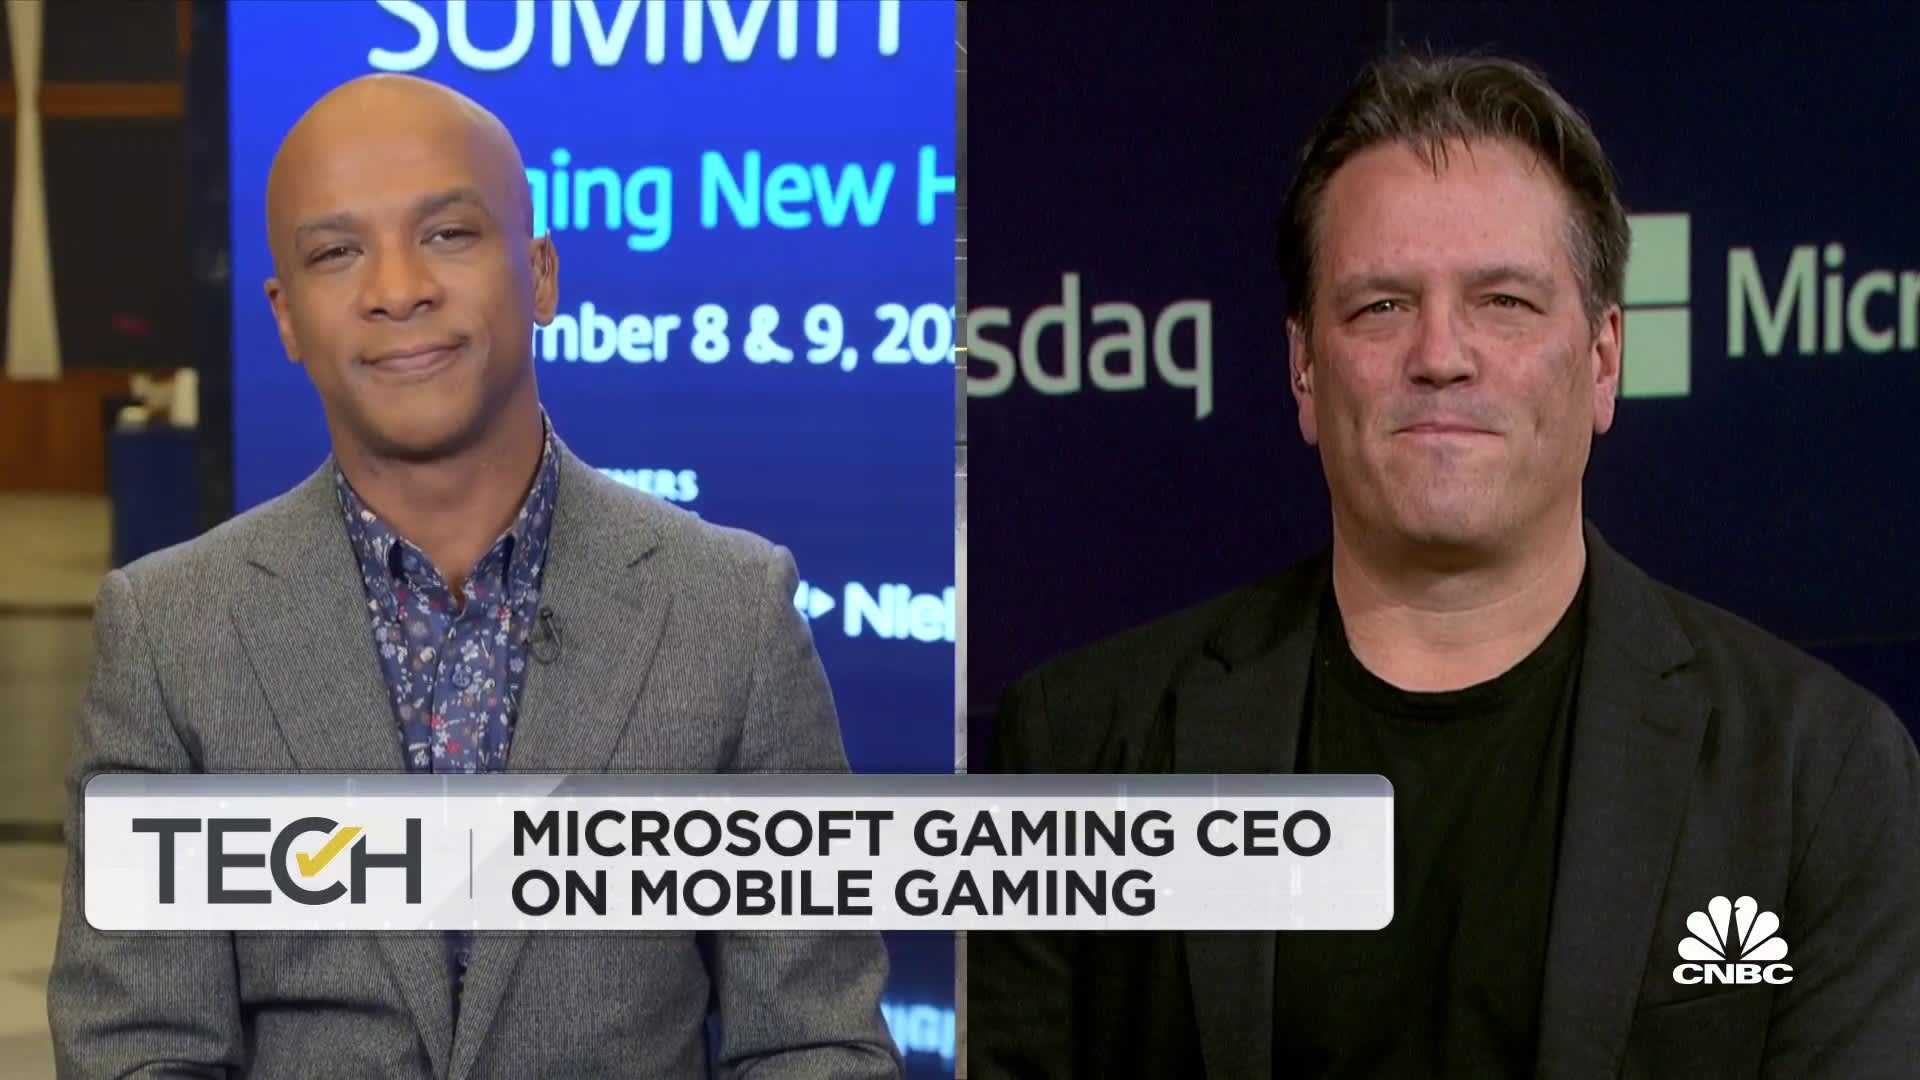 Phil Spencer makes yet another 10-year pledge for Xbox Cloud Gaming